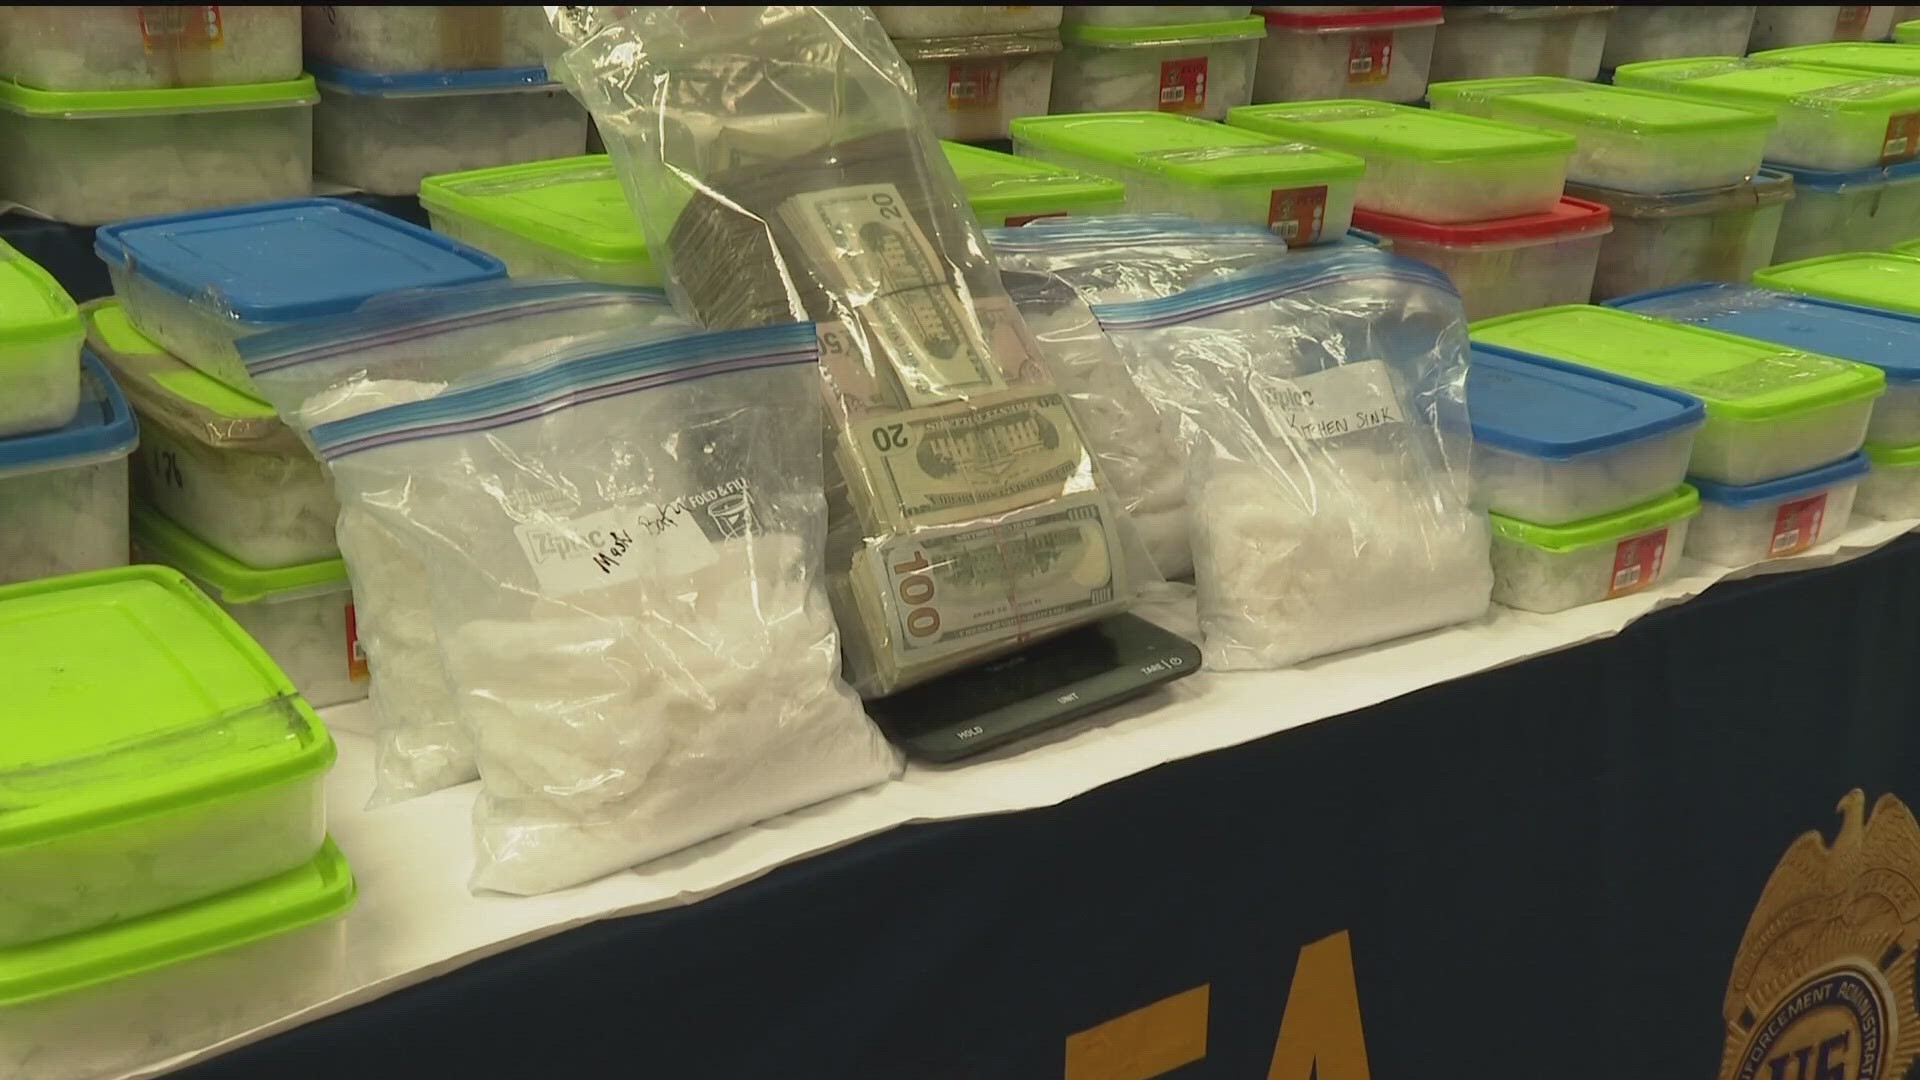 Cartels use Atlanta as a 'warehouse,' according to the federal law enforcement agency.